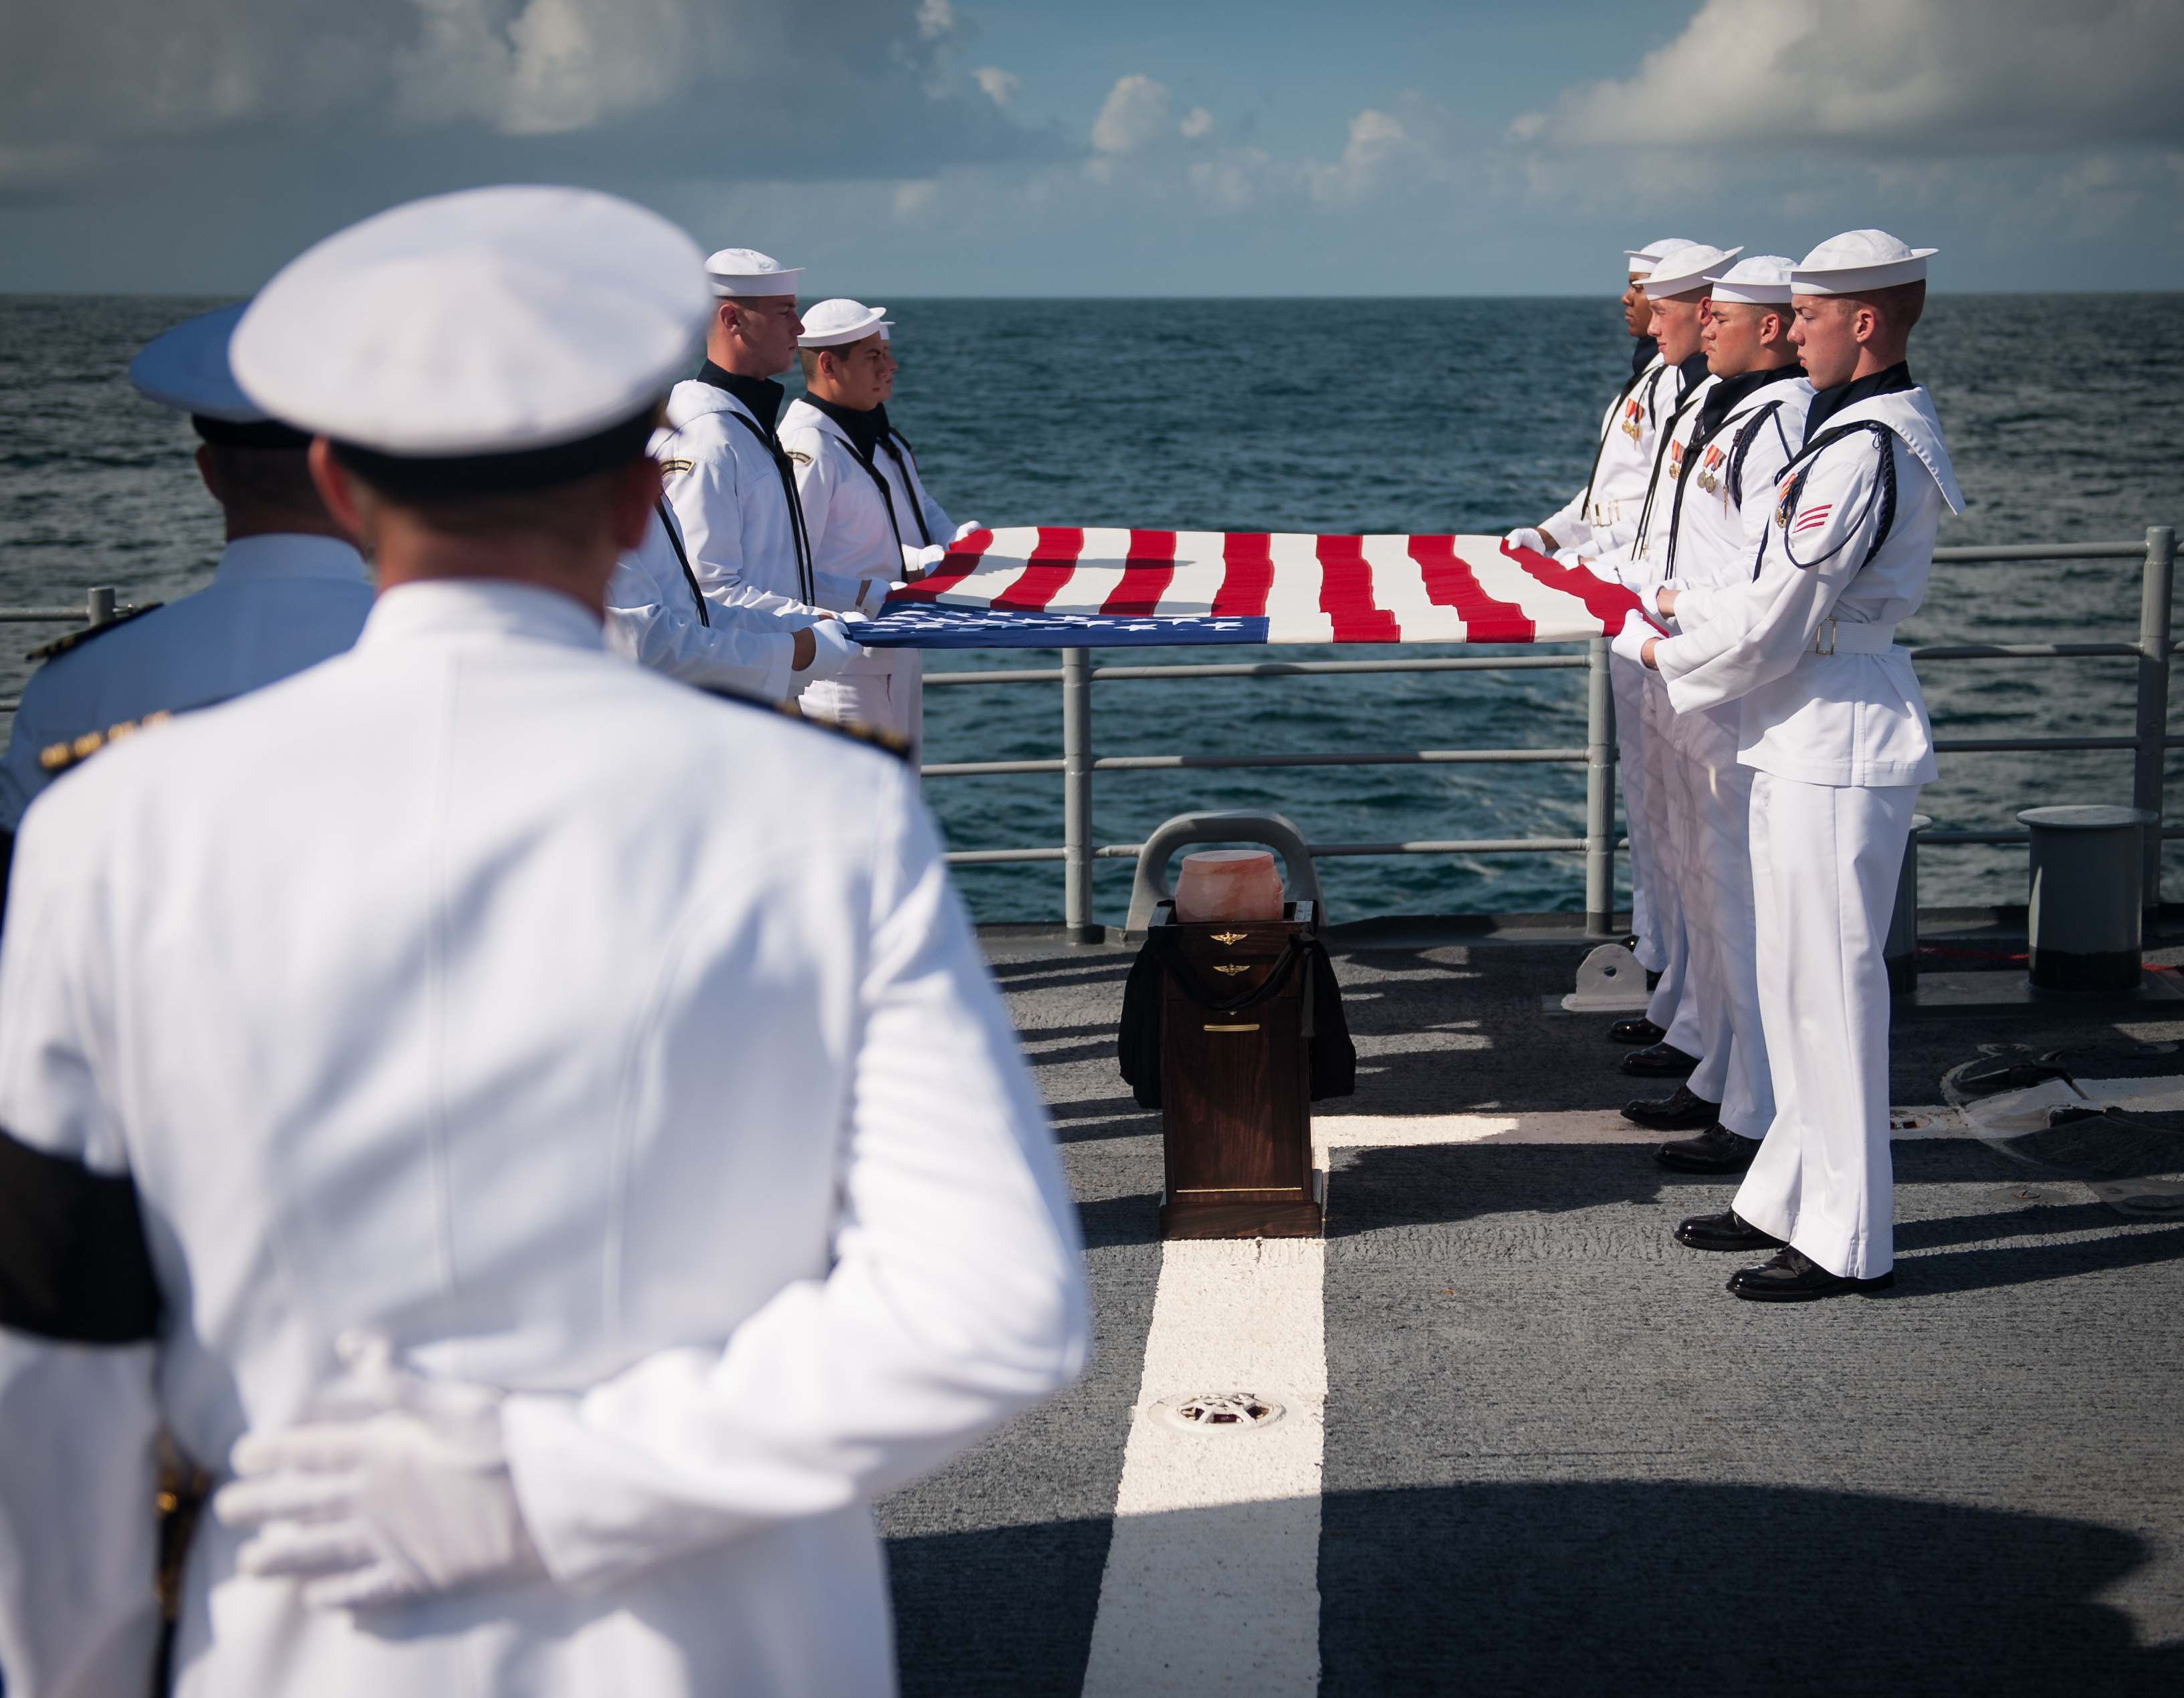 Members of the US Navy ceremonial guard hold an American flag over the cremains of Apollo 11 astronaut Neil Armstrong during a burial at sea service aboard the USS Philippine Sea (CG 58), Friday, Sept. 14, 2012, in the Atlantic Ocean. Armstrong, the first man to walk on the moon during the 1969 Apollo 11 mission, died Saturday, Aug. 25. He was 82.